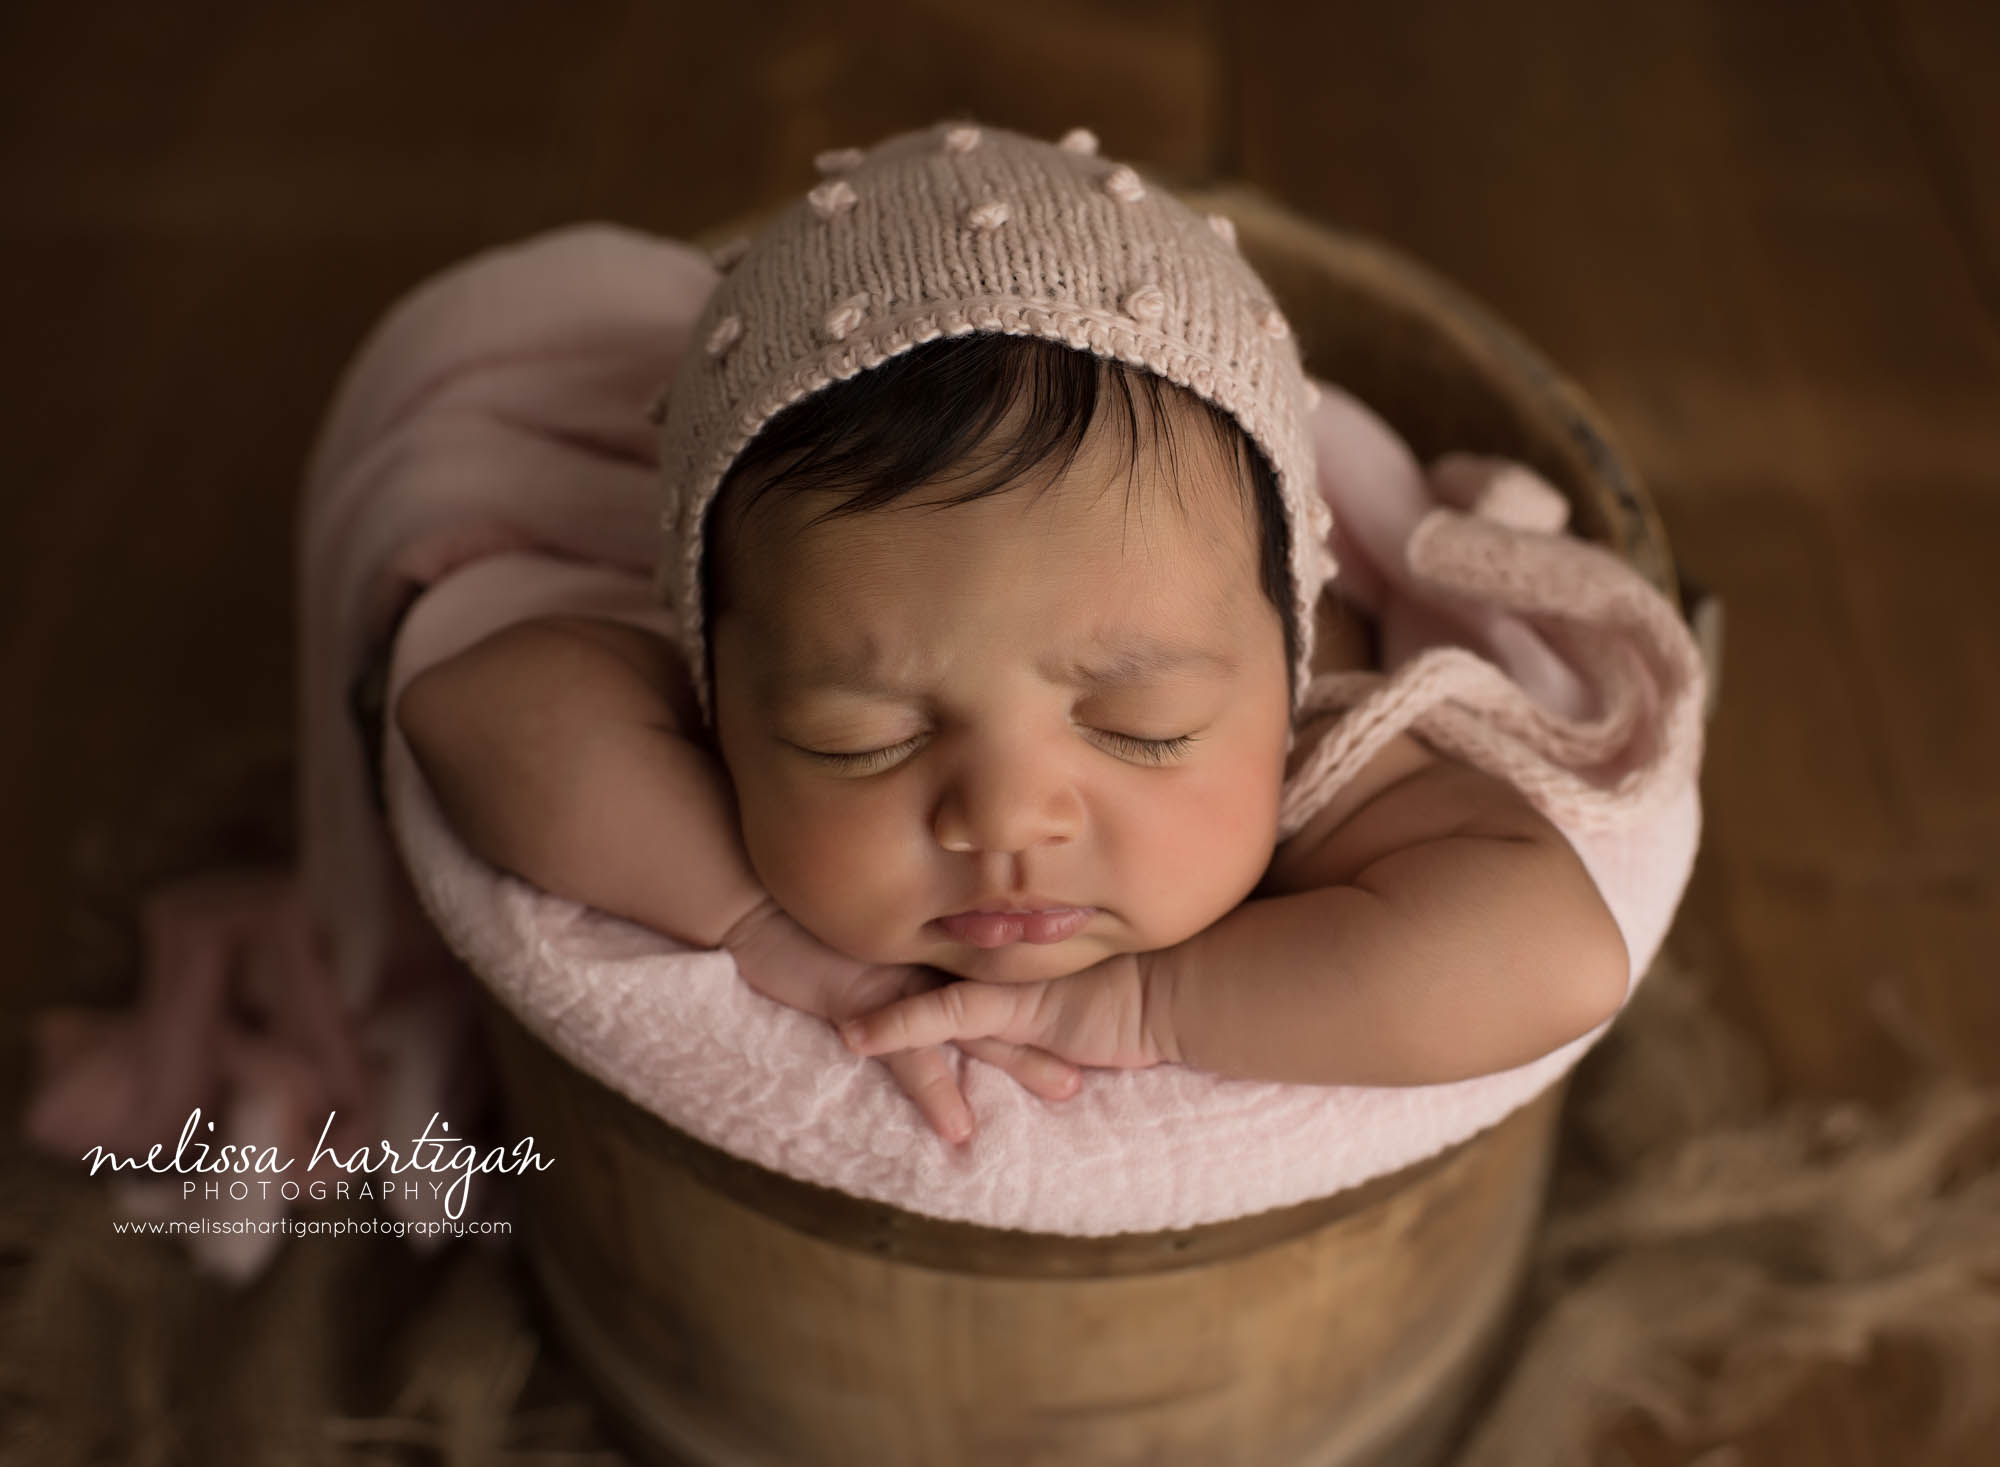 newborn baby girl posed with chin on hands in wooden barrel bucket with light pink knitted bonnet